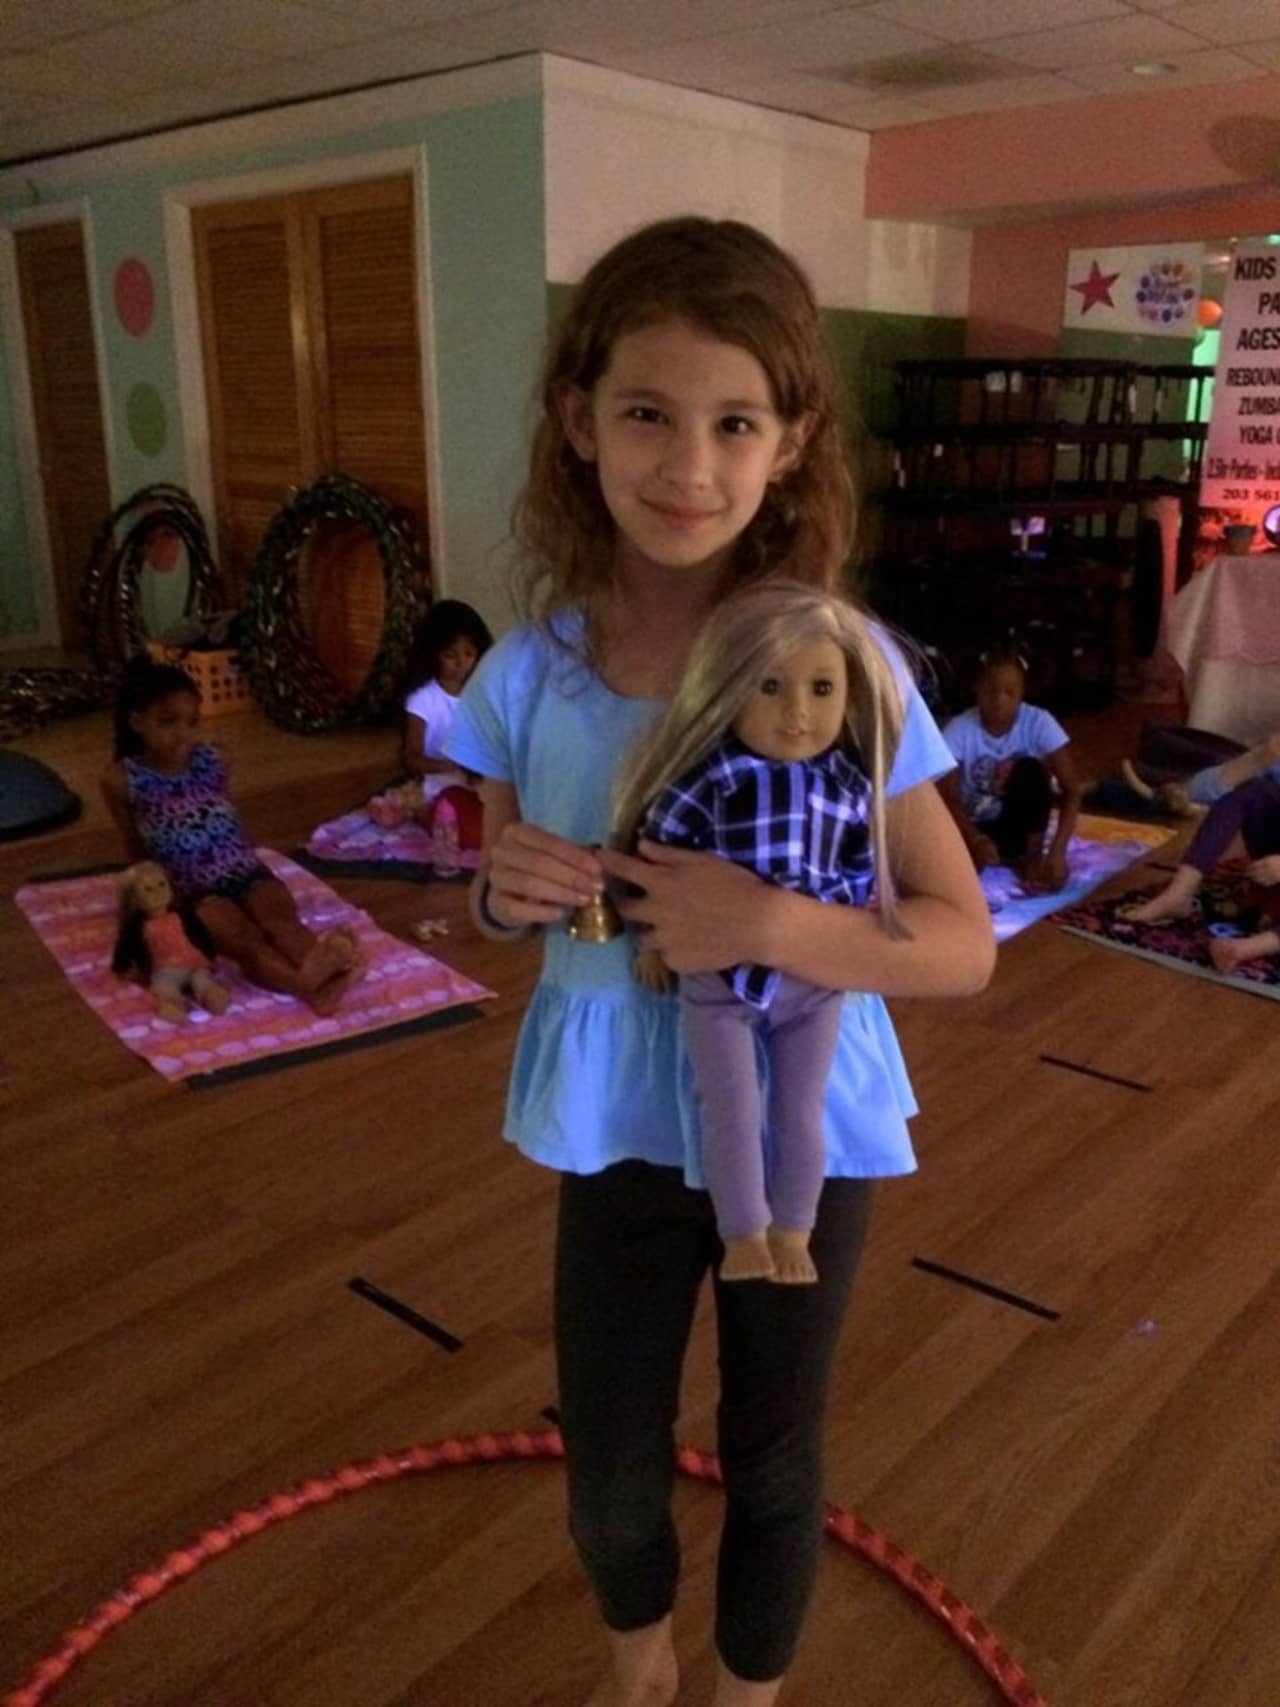 Bring your American Girl Doll to Ho-Ho-Kus Yoga for a session together.